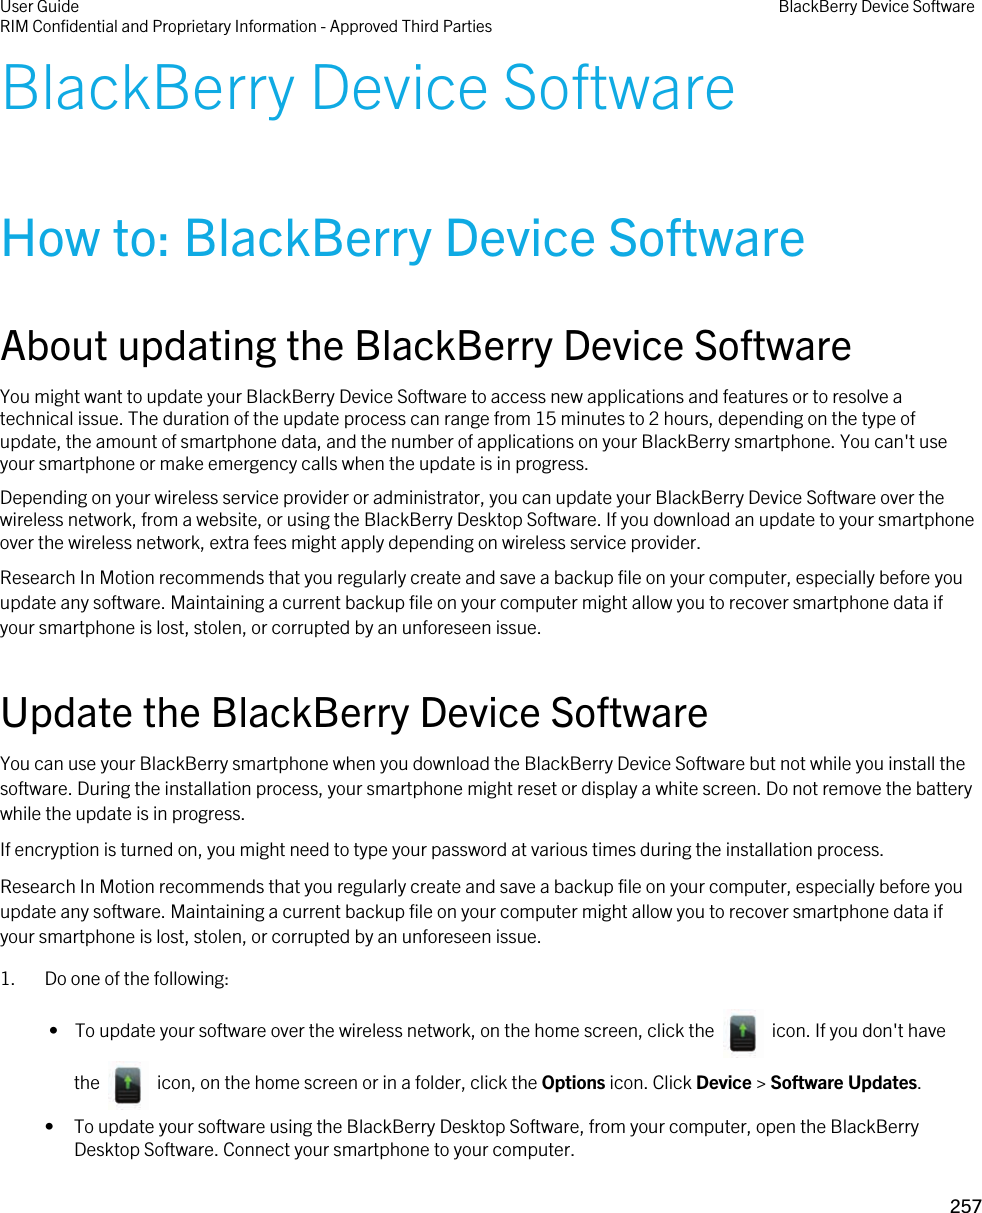 BlackBerry Device SoftwareHow to: BlackBerry Device SoftwareAbout updating the BlackBerry Device SoftwareYou might want to update your BlackBerry Device Software to access new applications and features or to resolve a technical issue. The duration of the update process can range from 15 minutes to 2 hours, depending on the type of update, the amount of smartphone data, and the number of applications on your BlackBerry smartphone. You can&apos;t use your smartphone or make emergency calls when the update is in progress.Depending on your wireless service provider or administrator, you can update your BlackBerry Device Software over the wireless network, from a website, or using the BlackBerry Desktop Software. If you download an update to your smartphone over the wireless network, extra fees might apply depending on wireless service provider.Research In Motion recommends that you regularly create and save a backup file on your computer, especially before you update any software. Maintaining a current backup file on your computer might allow you to recover smartphone data if your smartphone is lost, stolen, or corrupted by an unforeseen issue.Update the BlackBerry Device SoftwareYou can use your BlackBerry smartphone when you download the BlackBerry Device Software but not while you install the software. During the installation process, your smartphone might reset or display a white screen. Do not remove the battery while the update is in progress.If encryption is turned on, you might need to type your password at various times during the installation process.Research In Motion recommends that you regularly create and save a backup file on your computer, especially before you update any software. Maintaining a current backup file on your computer might allow you to recover smartphone data if your smartphone is lost, stolen, or corrupted by an unforeseen issue.1. Do one of the following: •  To update your software over the wireless network, on the home screen, click the    icon. If you don&apos;t have the    icon, on the home screen or in a folder, click the Options icon. Click Device &gt; Software Updates.• To update your software using the BlackBerry Desktop Software, from your computer, open the BlackBerry Desktop Software. Connect your smartphone to your computer.User GuideRIM Confidential and Proprietary Information - Approved Third Parties BlackBerry Device Software257 